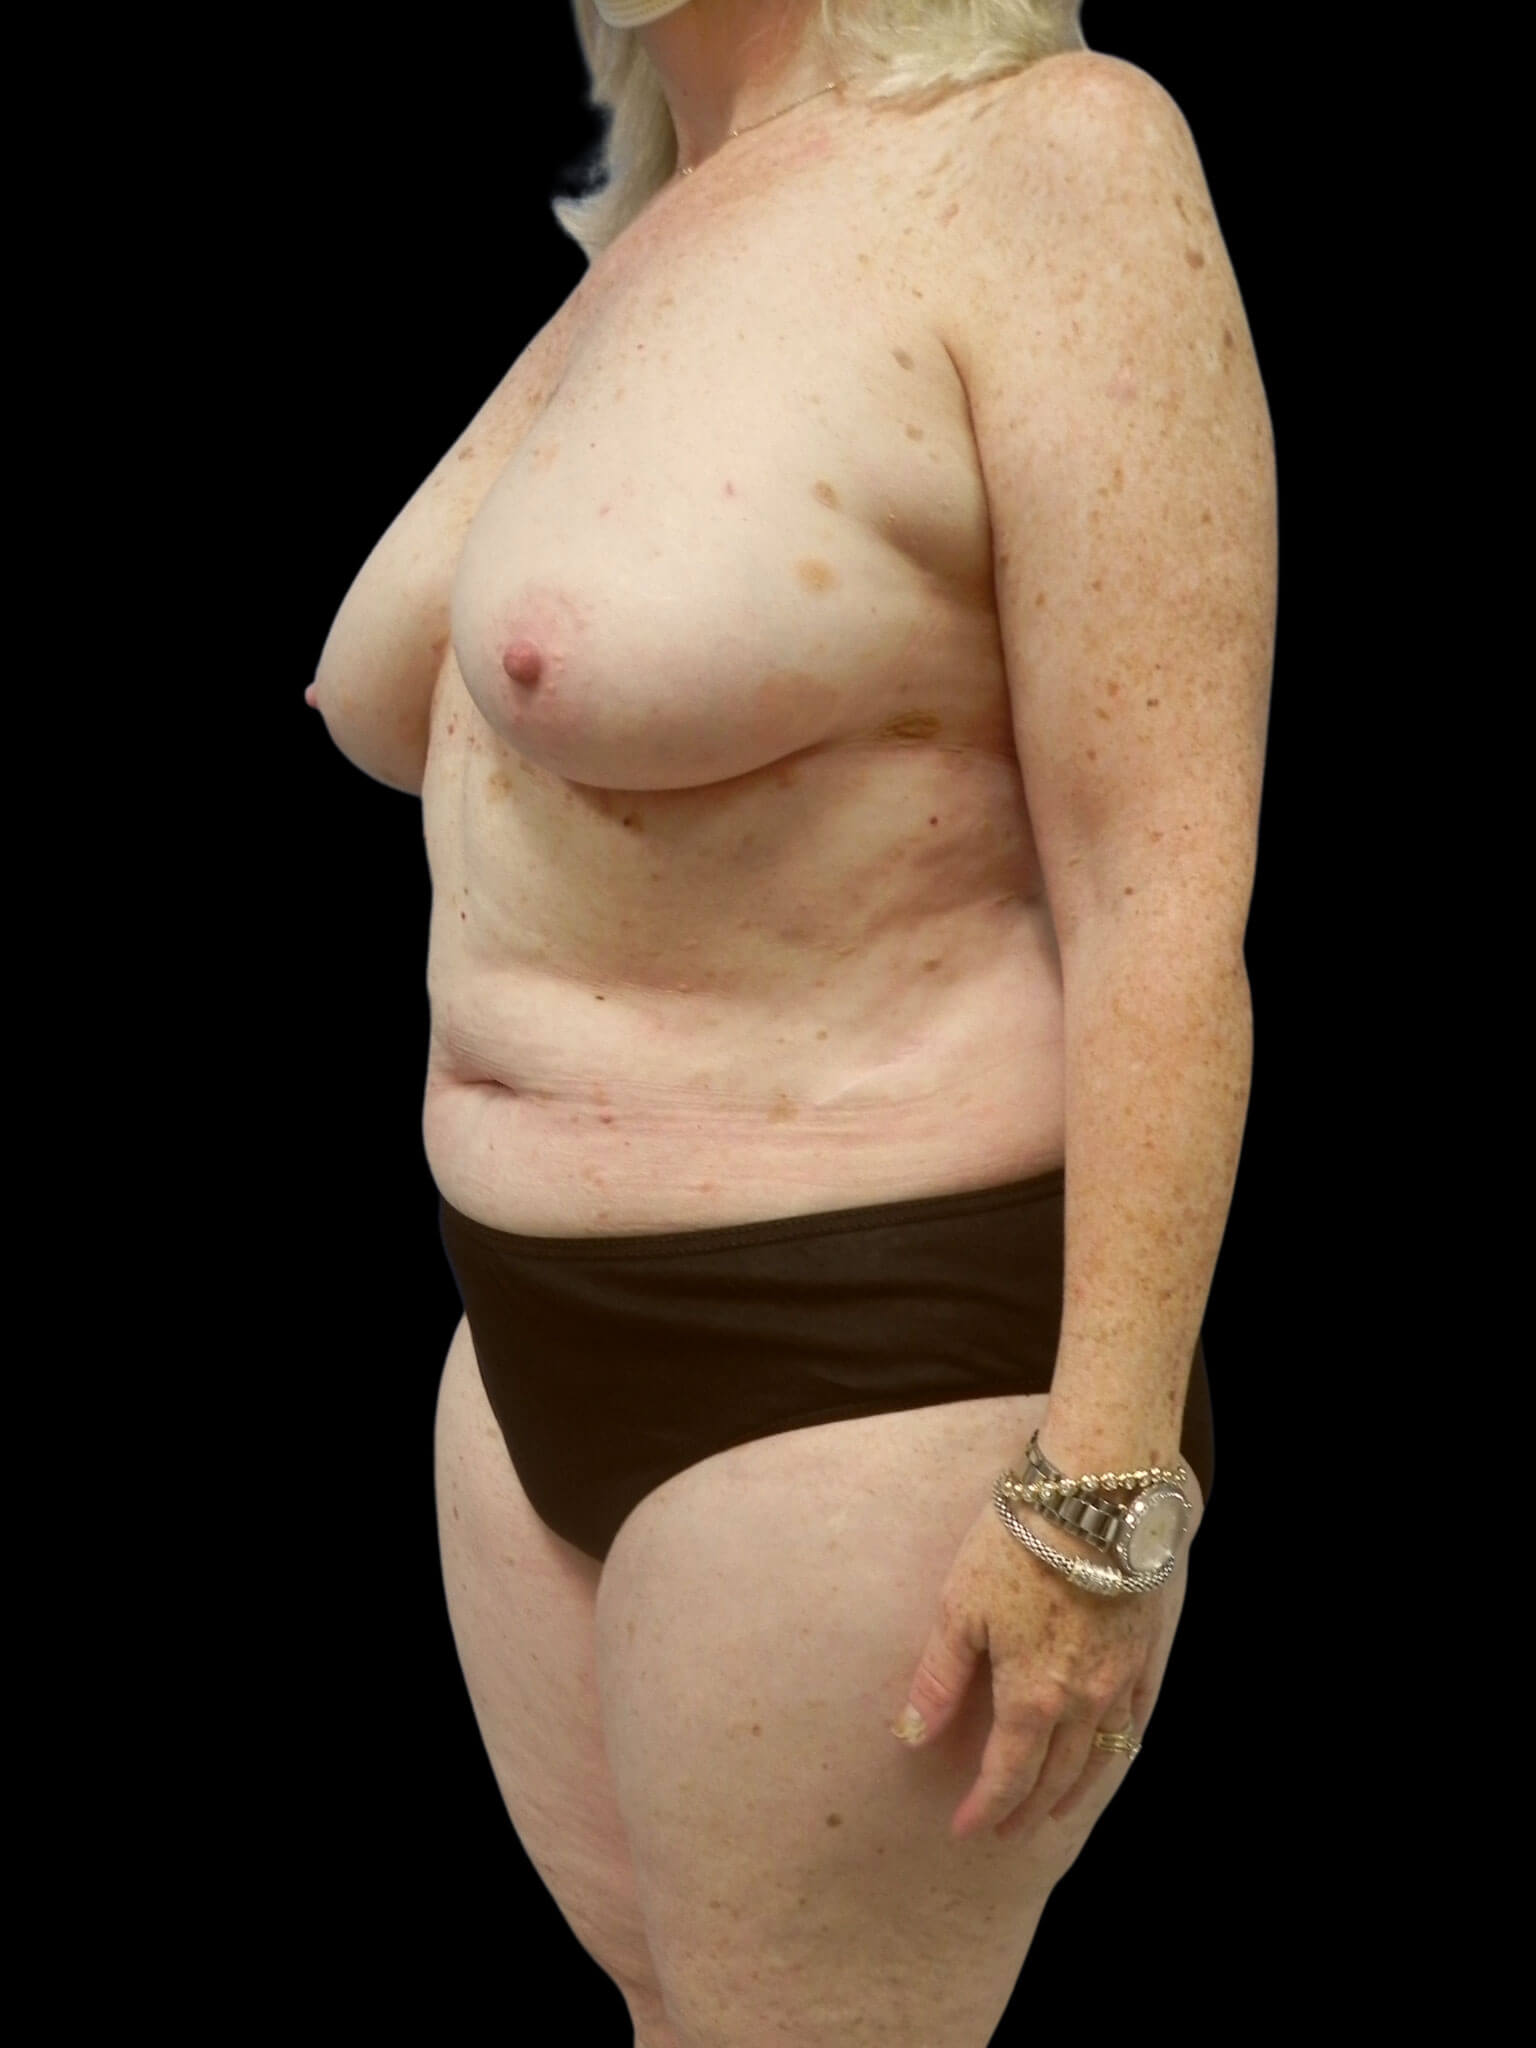 Stage 1: Bilateral Mastectomy with Immediate High Definition DIEP Flap Breast Reconstruction.Stage 2: Bilateral Breast Revision with Liposuction.